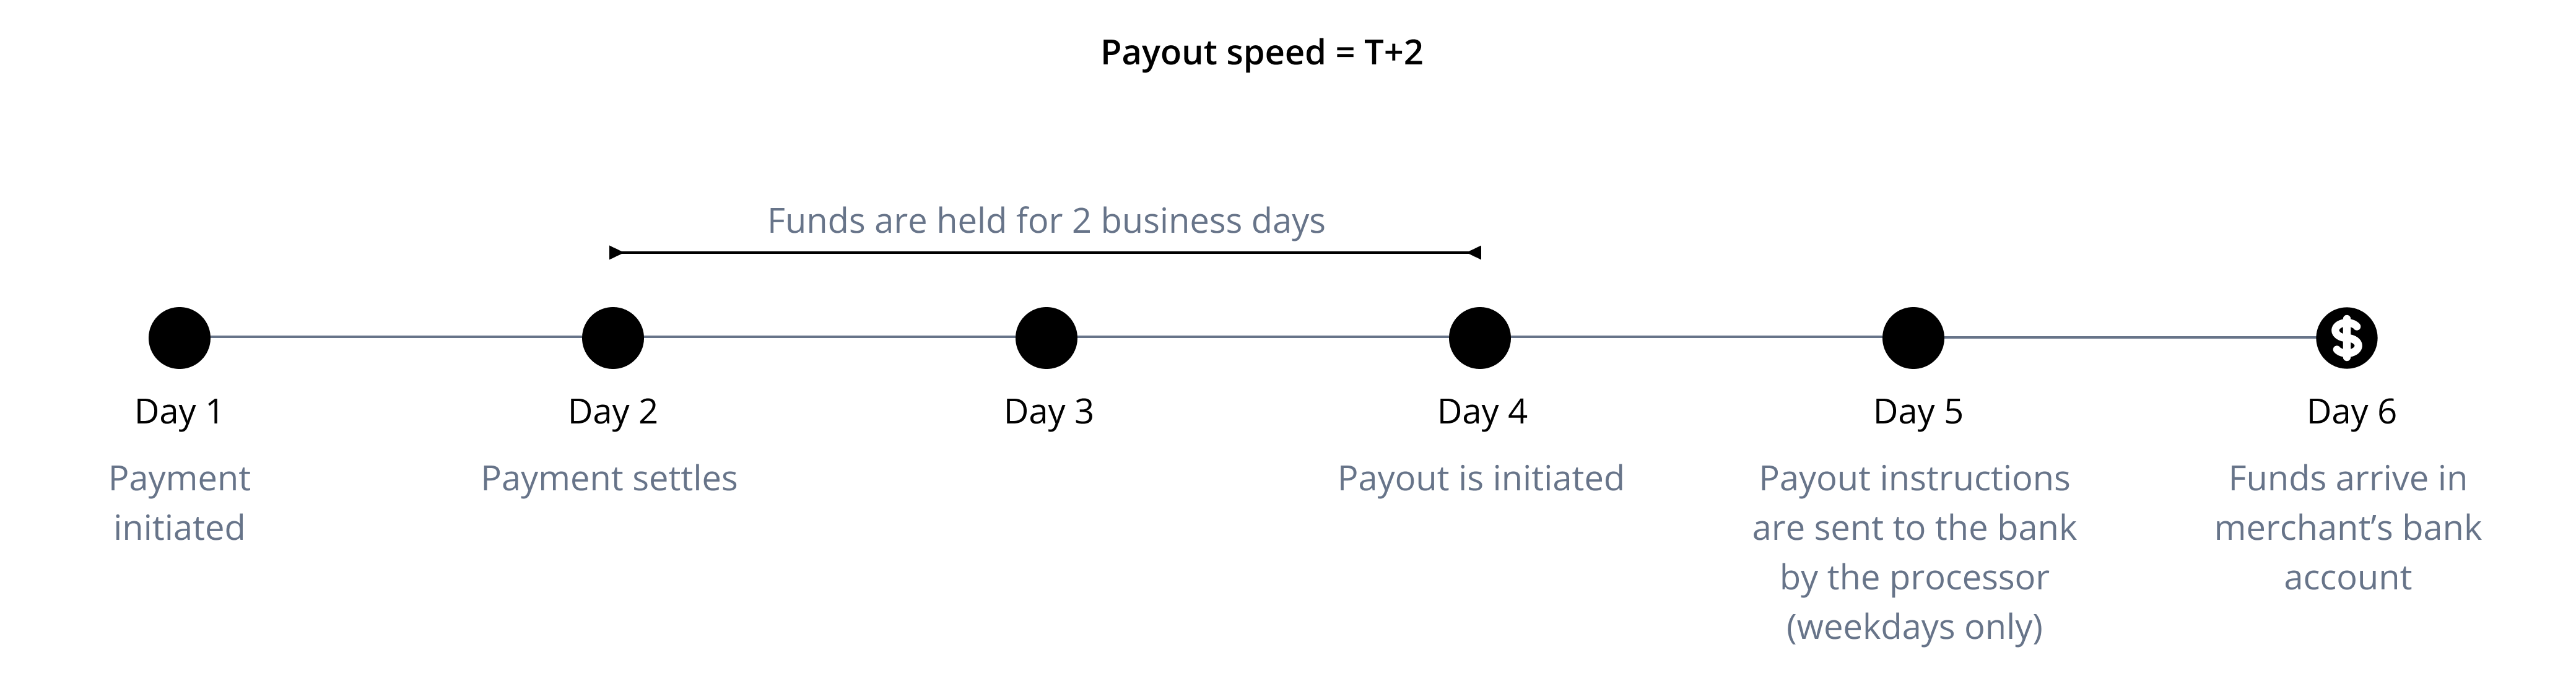 payment lifecycle _ T+2 payout speed.png